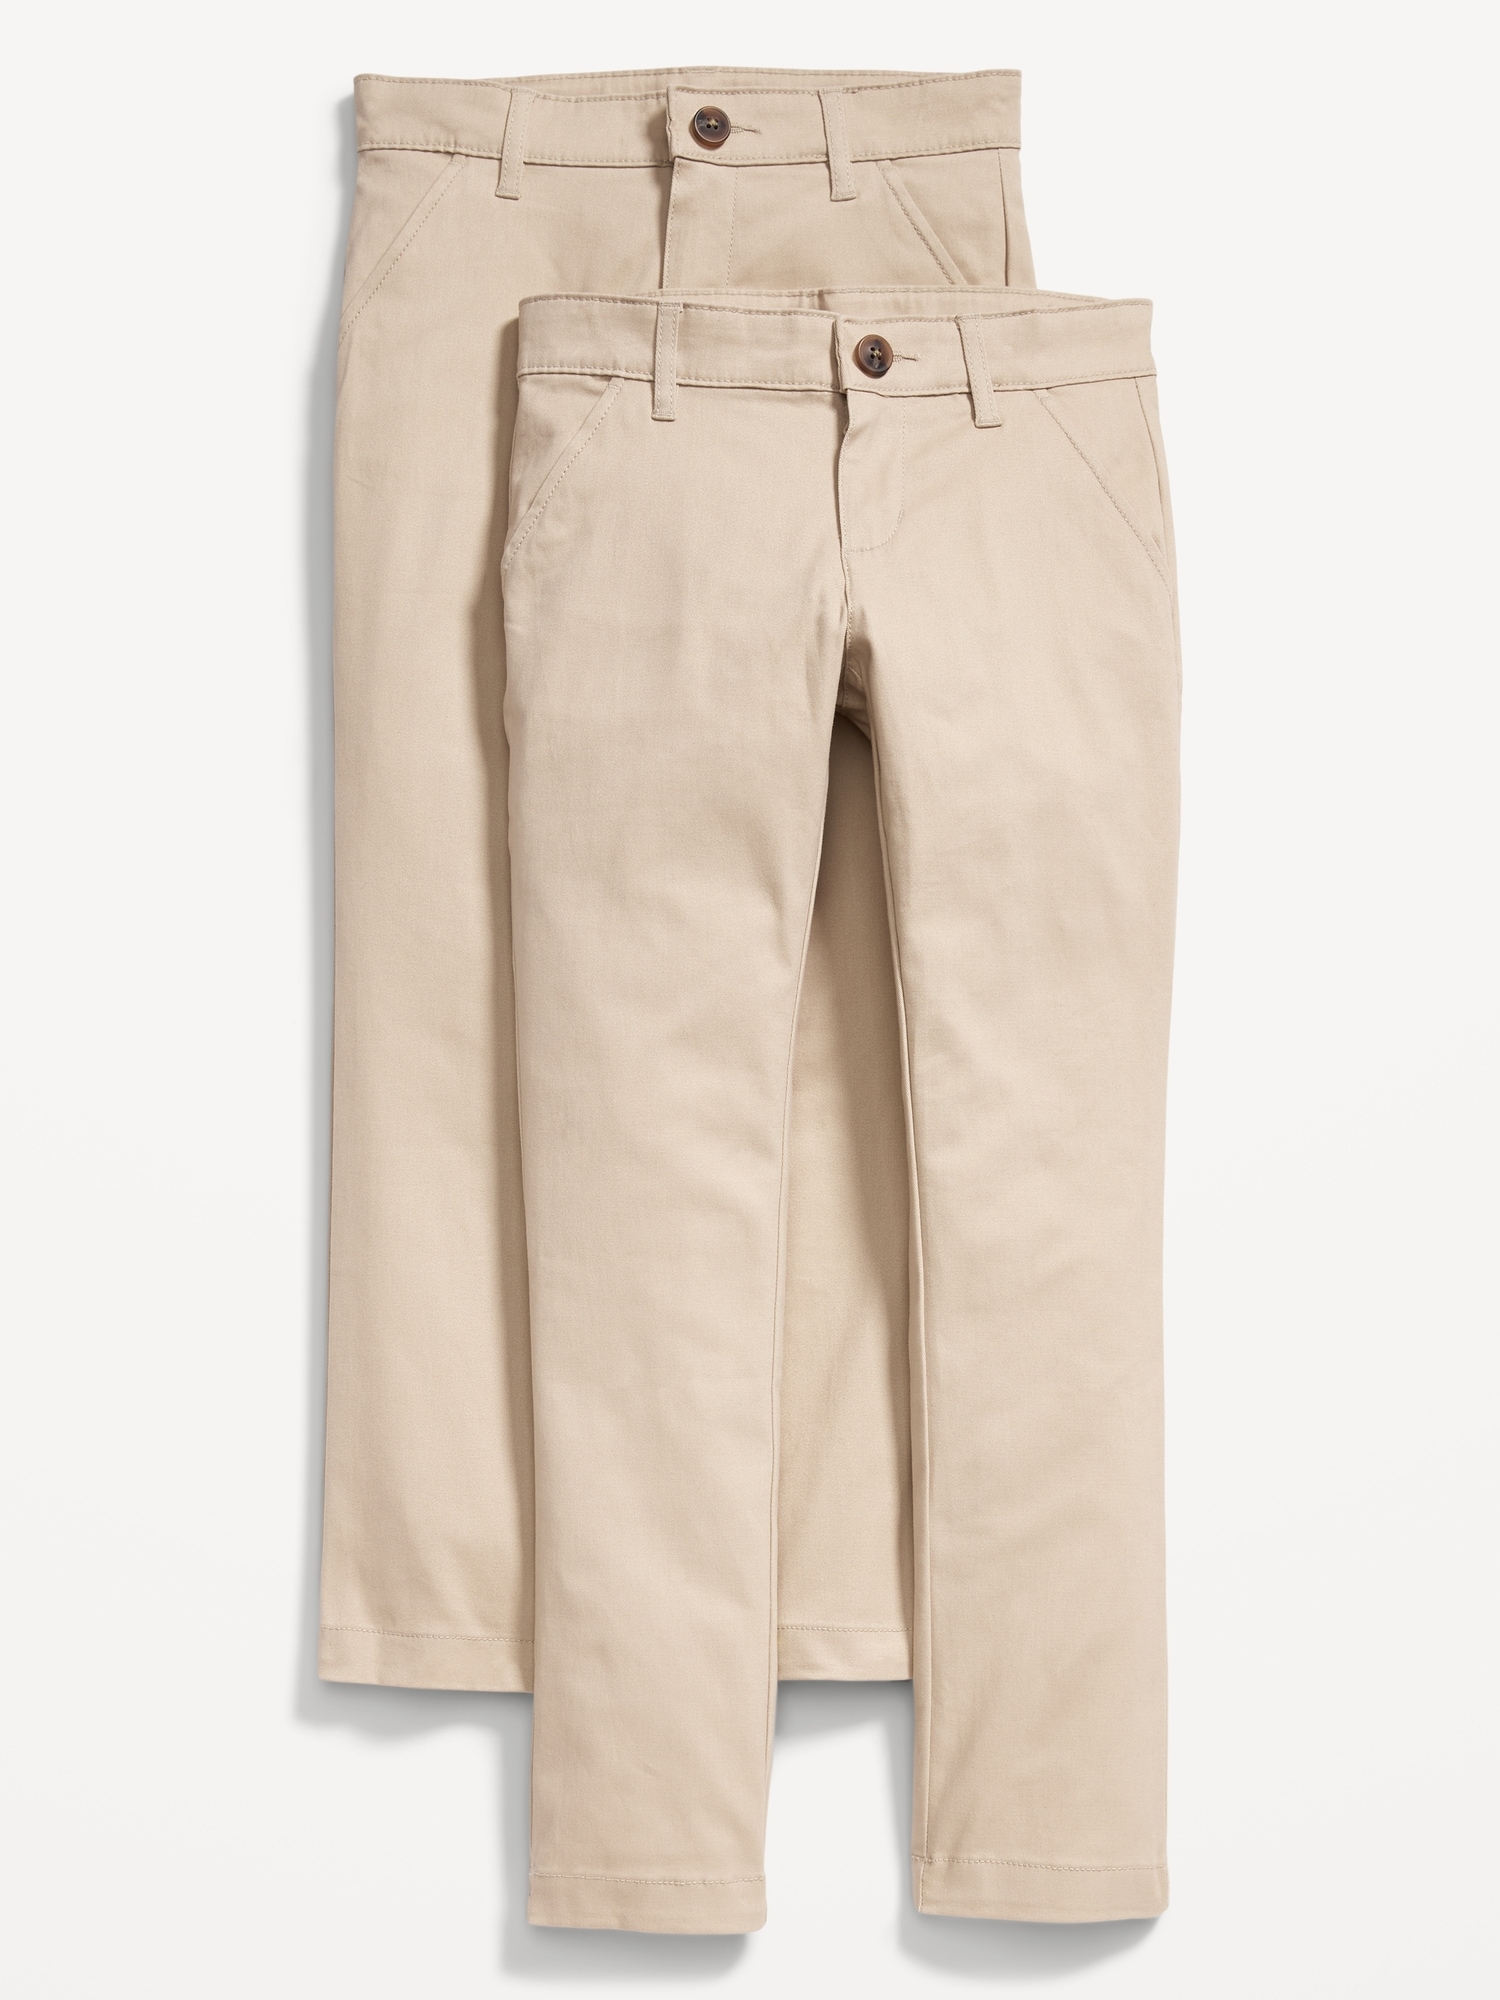 Old Navy Cargo Pants 50% Off | Free Stuff Finder